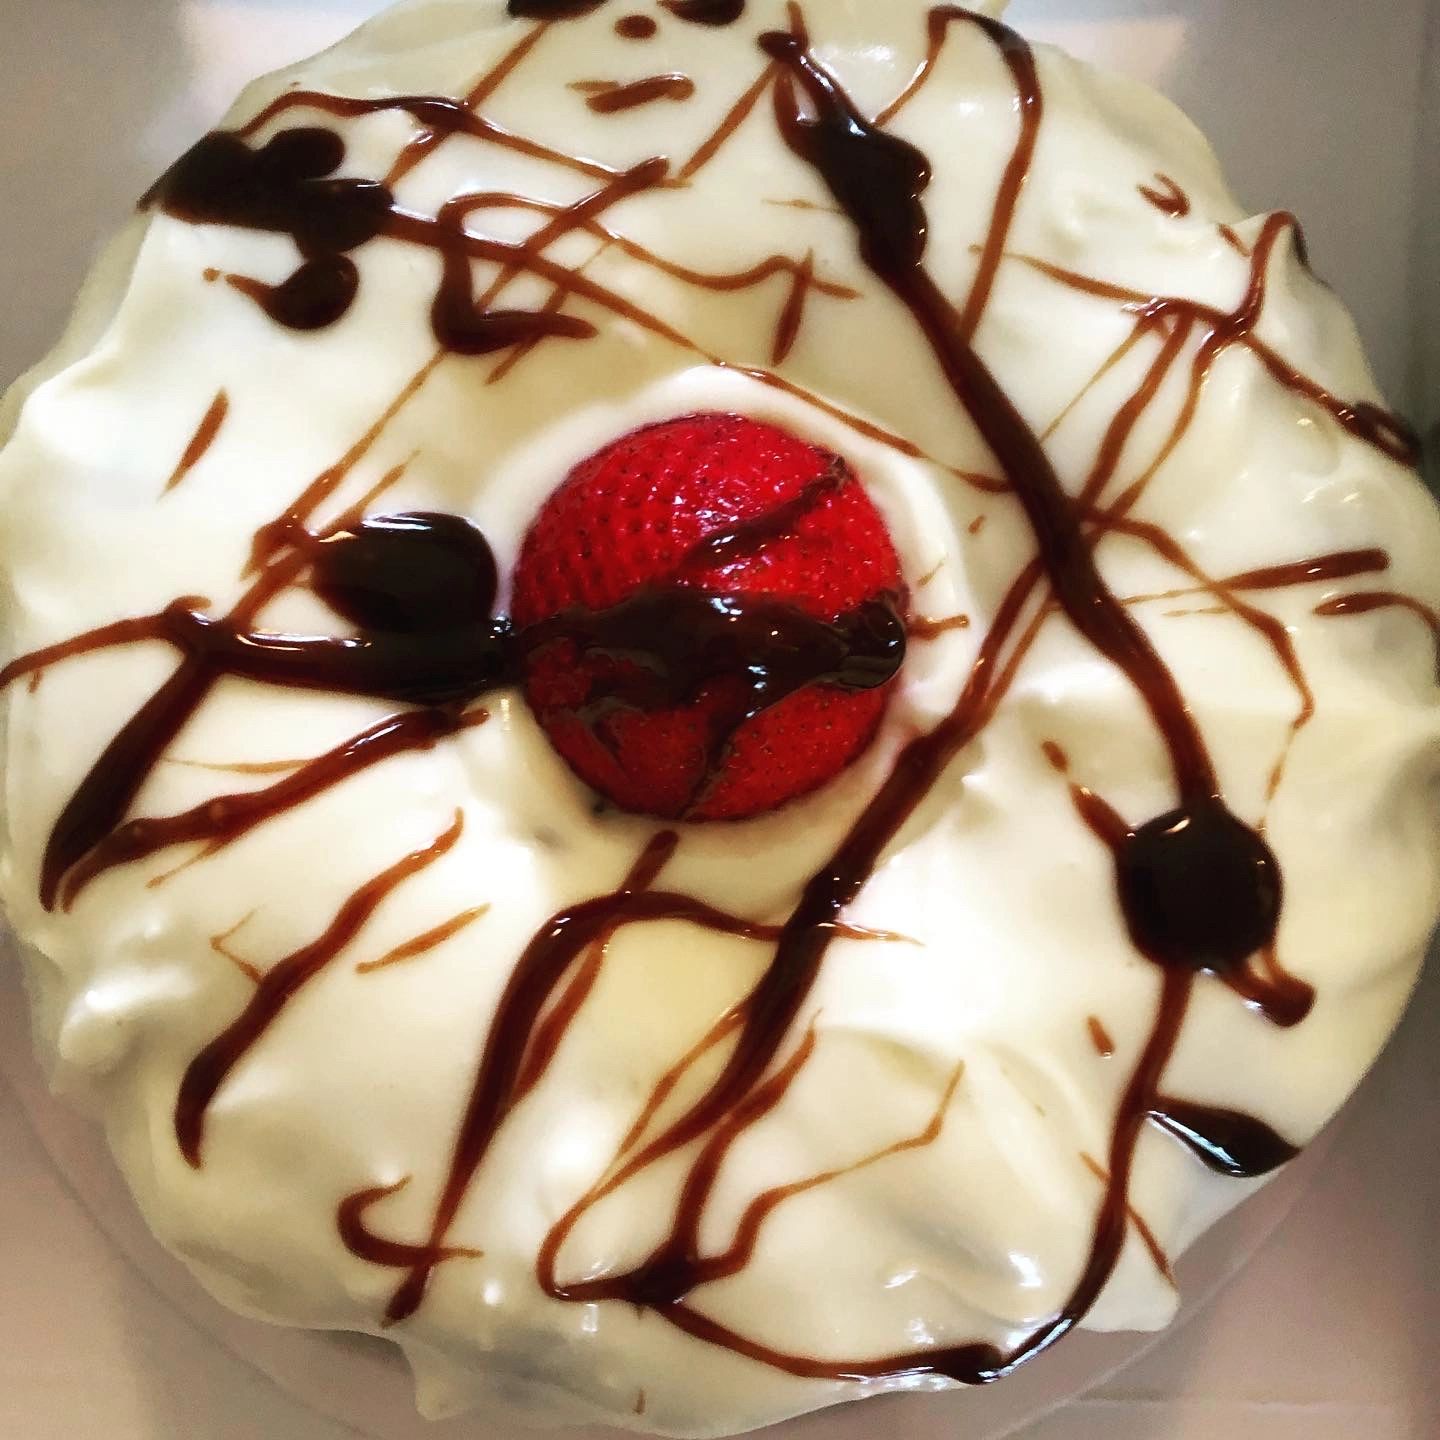 Don Cream is our signature red velvet pound cake with cream cheese glaze and fudge drizzle.  